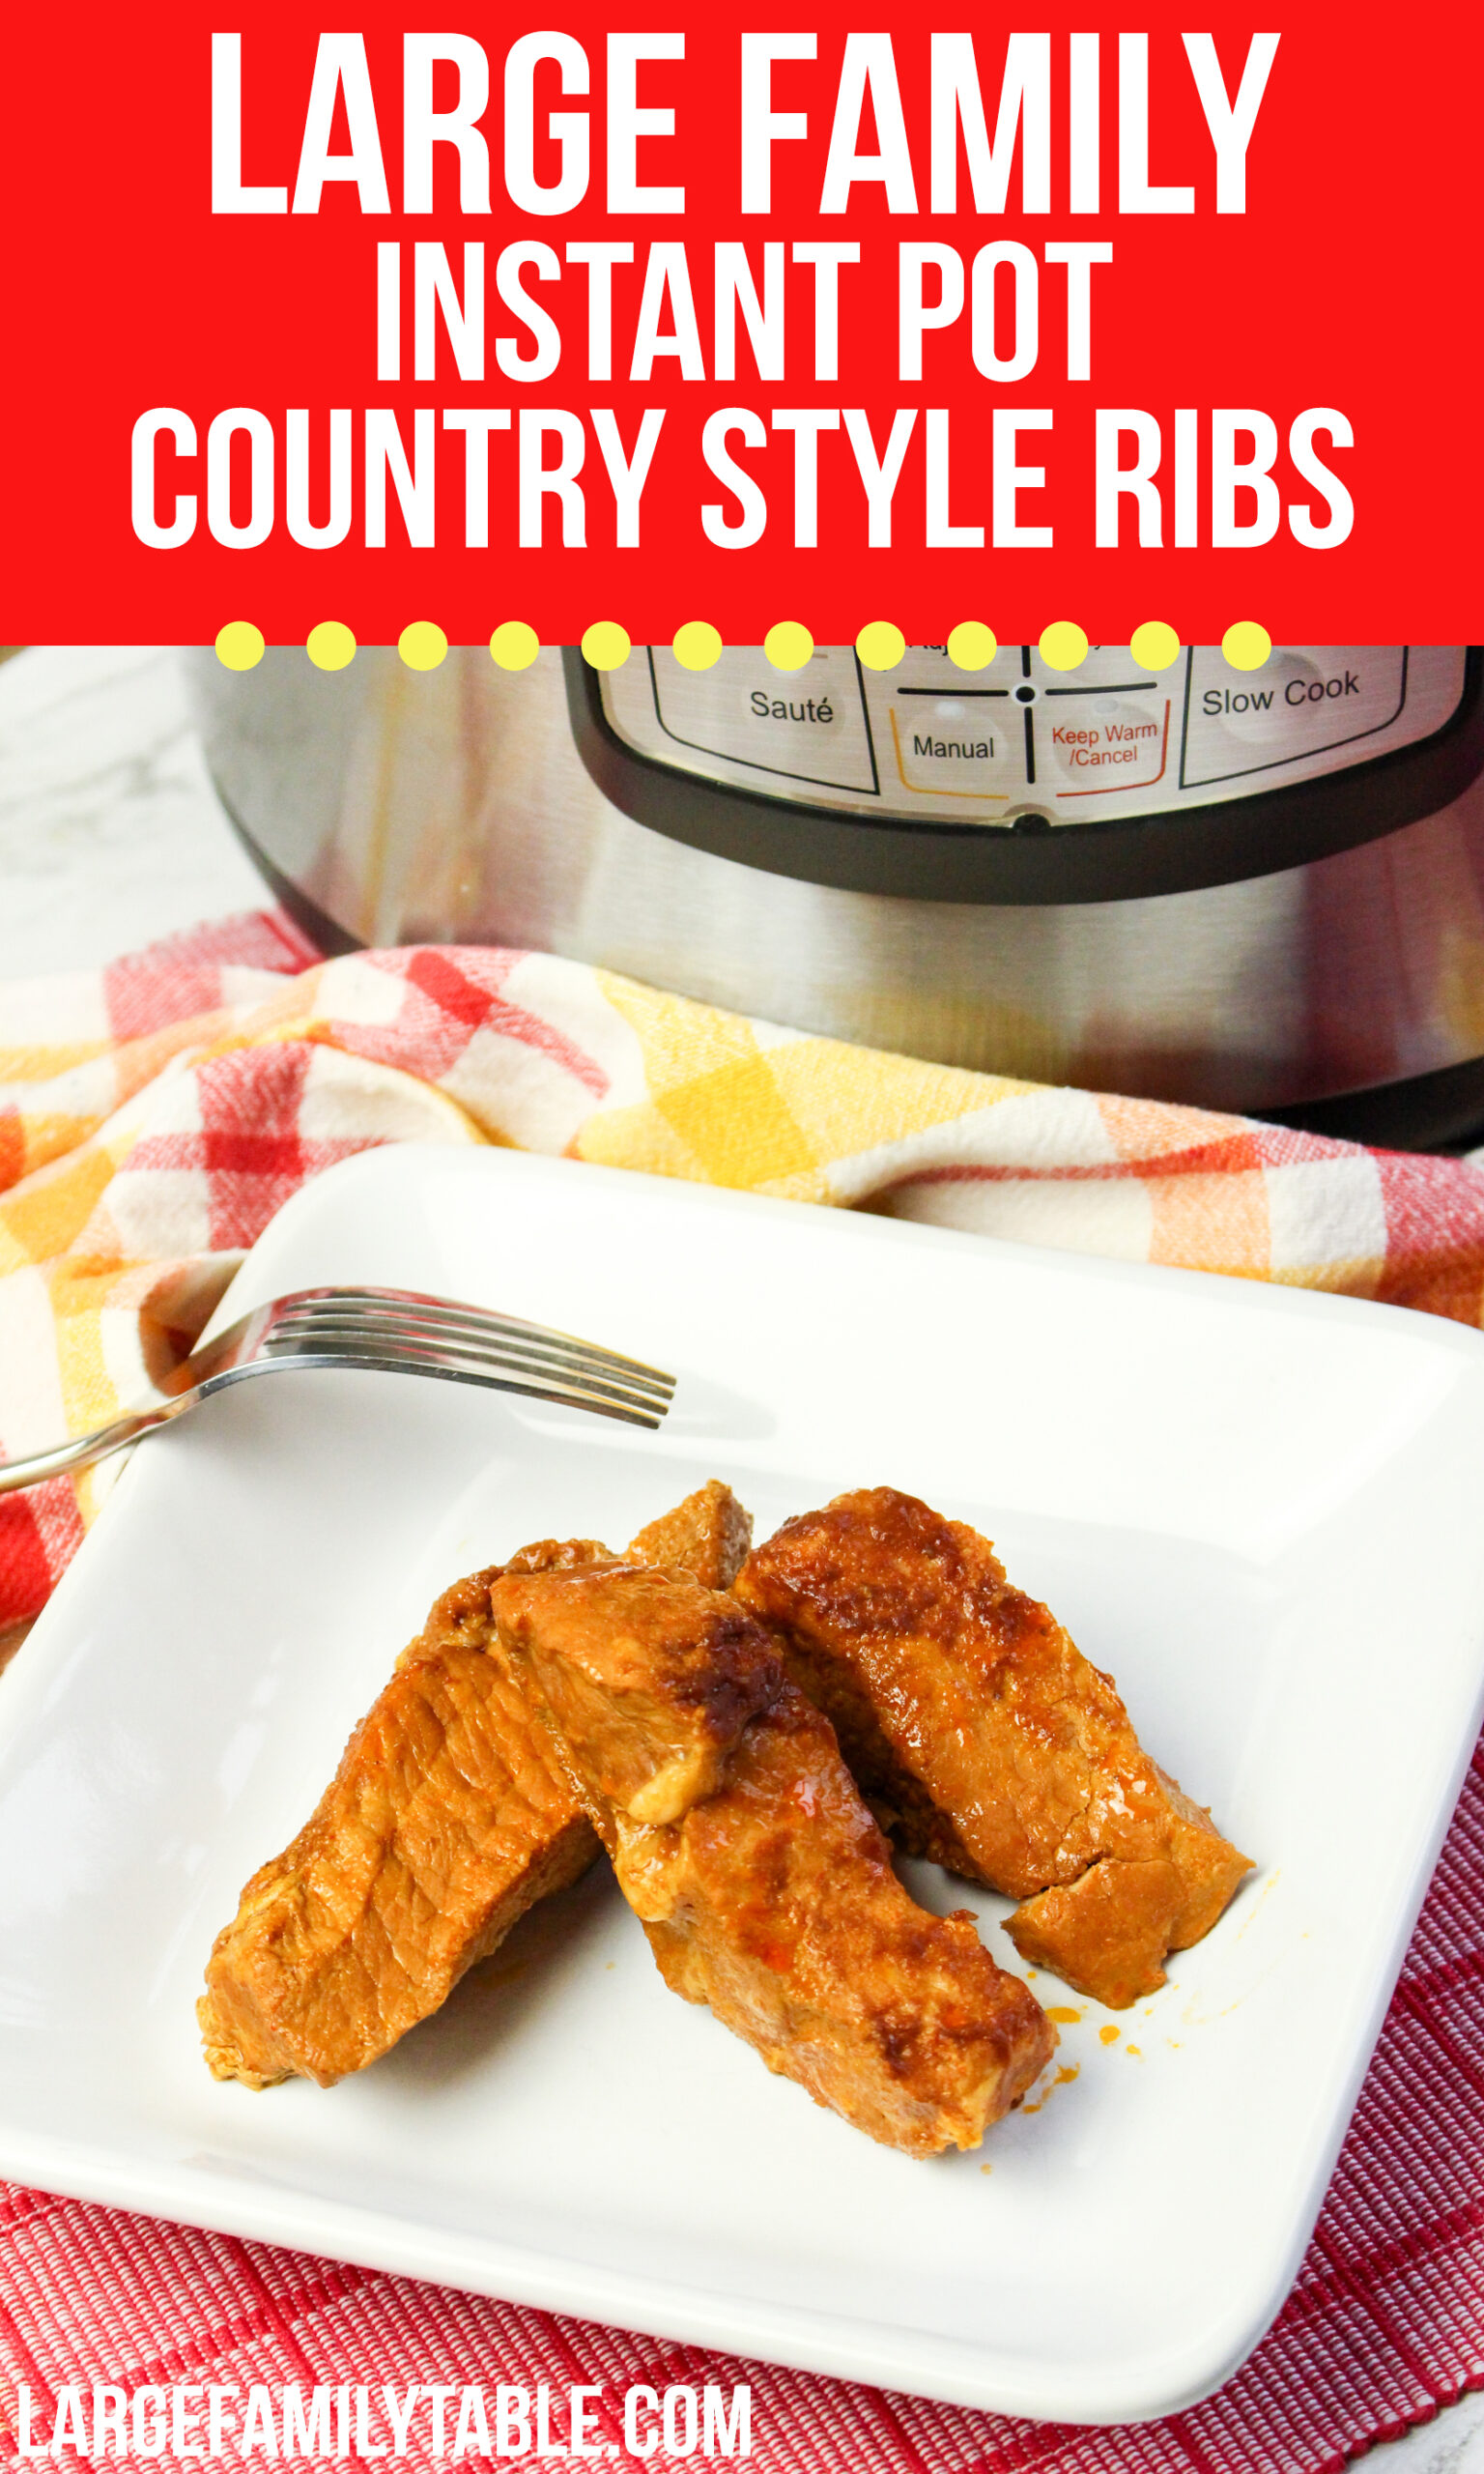 Large Family Instant Pot Country Style Ribs